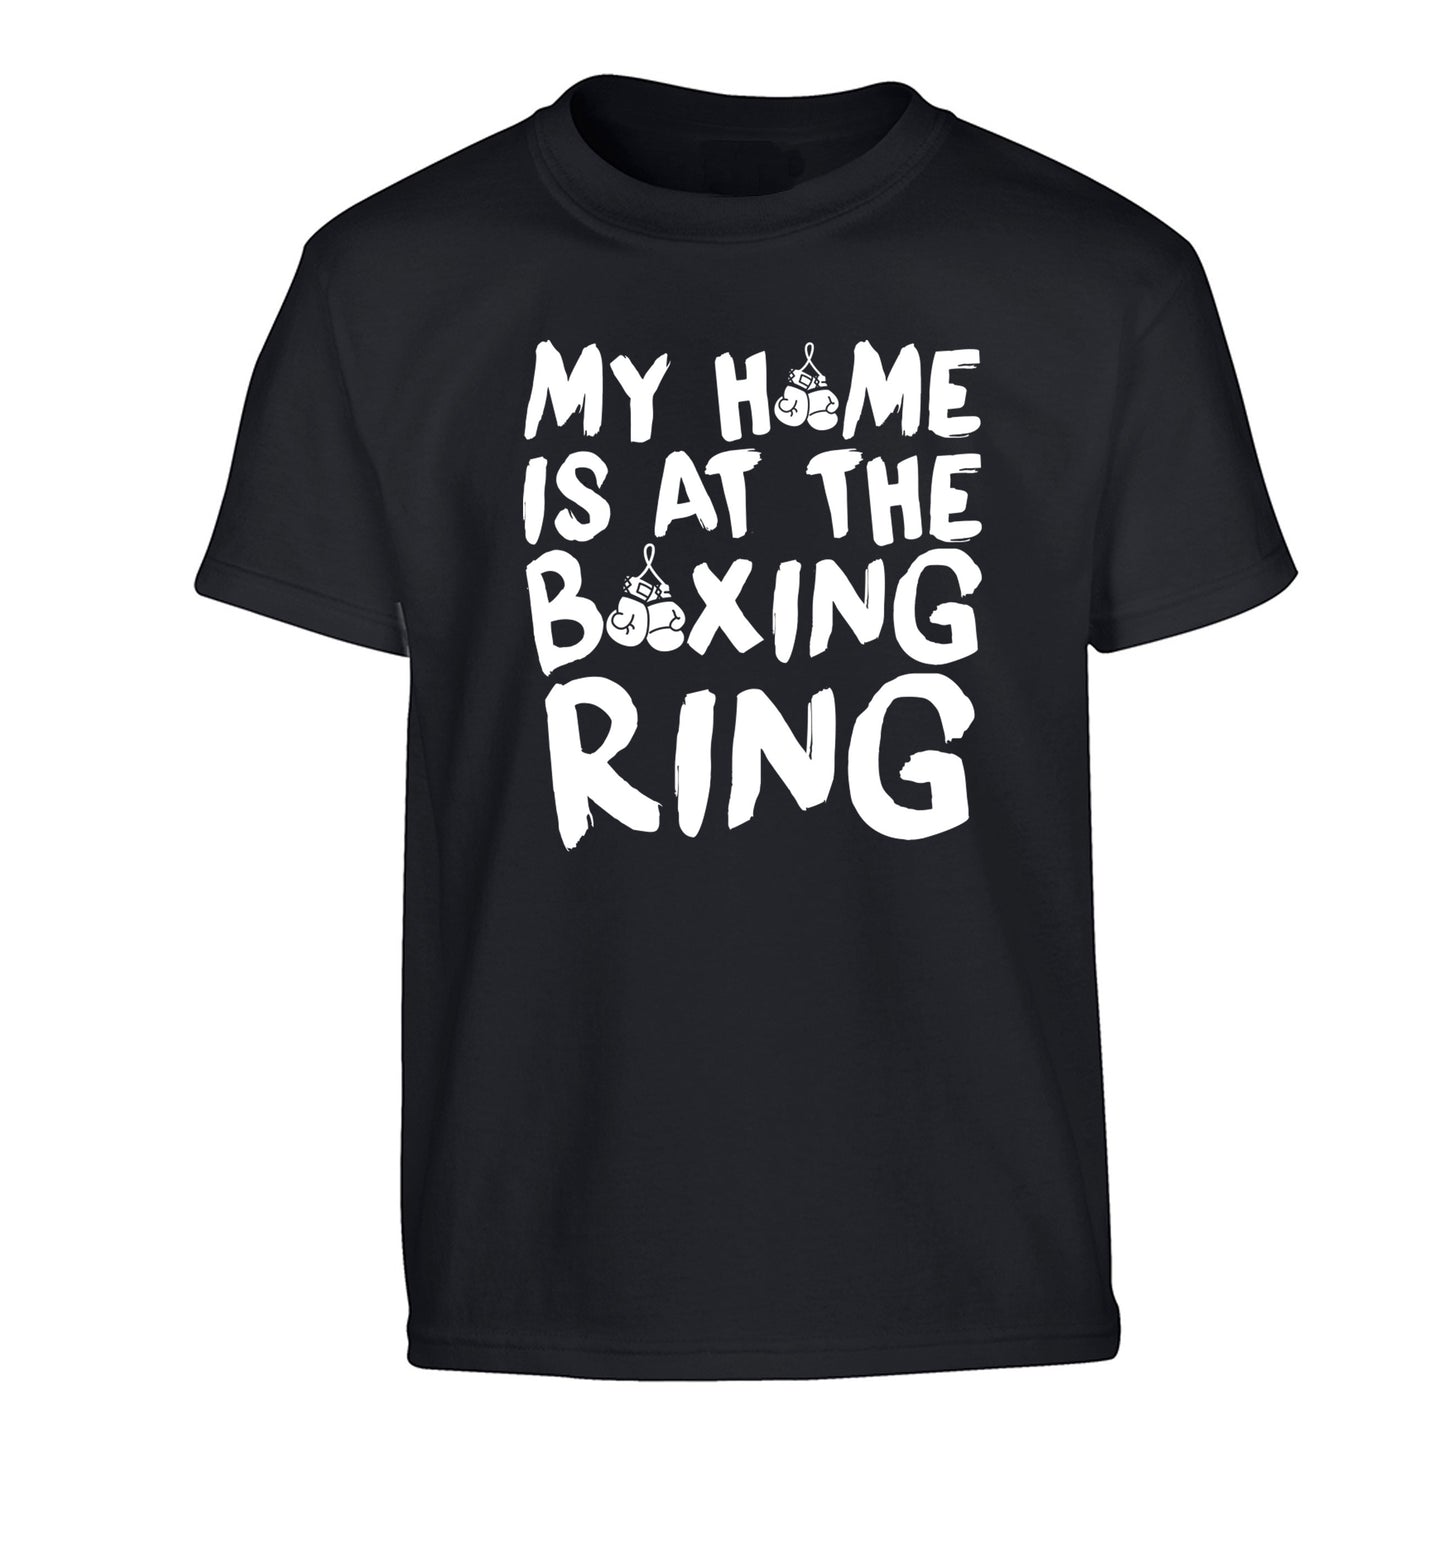 My home is at the boxing ring Children's black Tshirt 12-14 Years